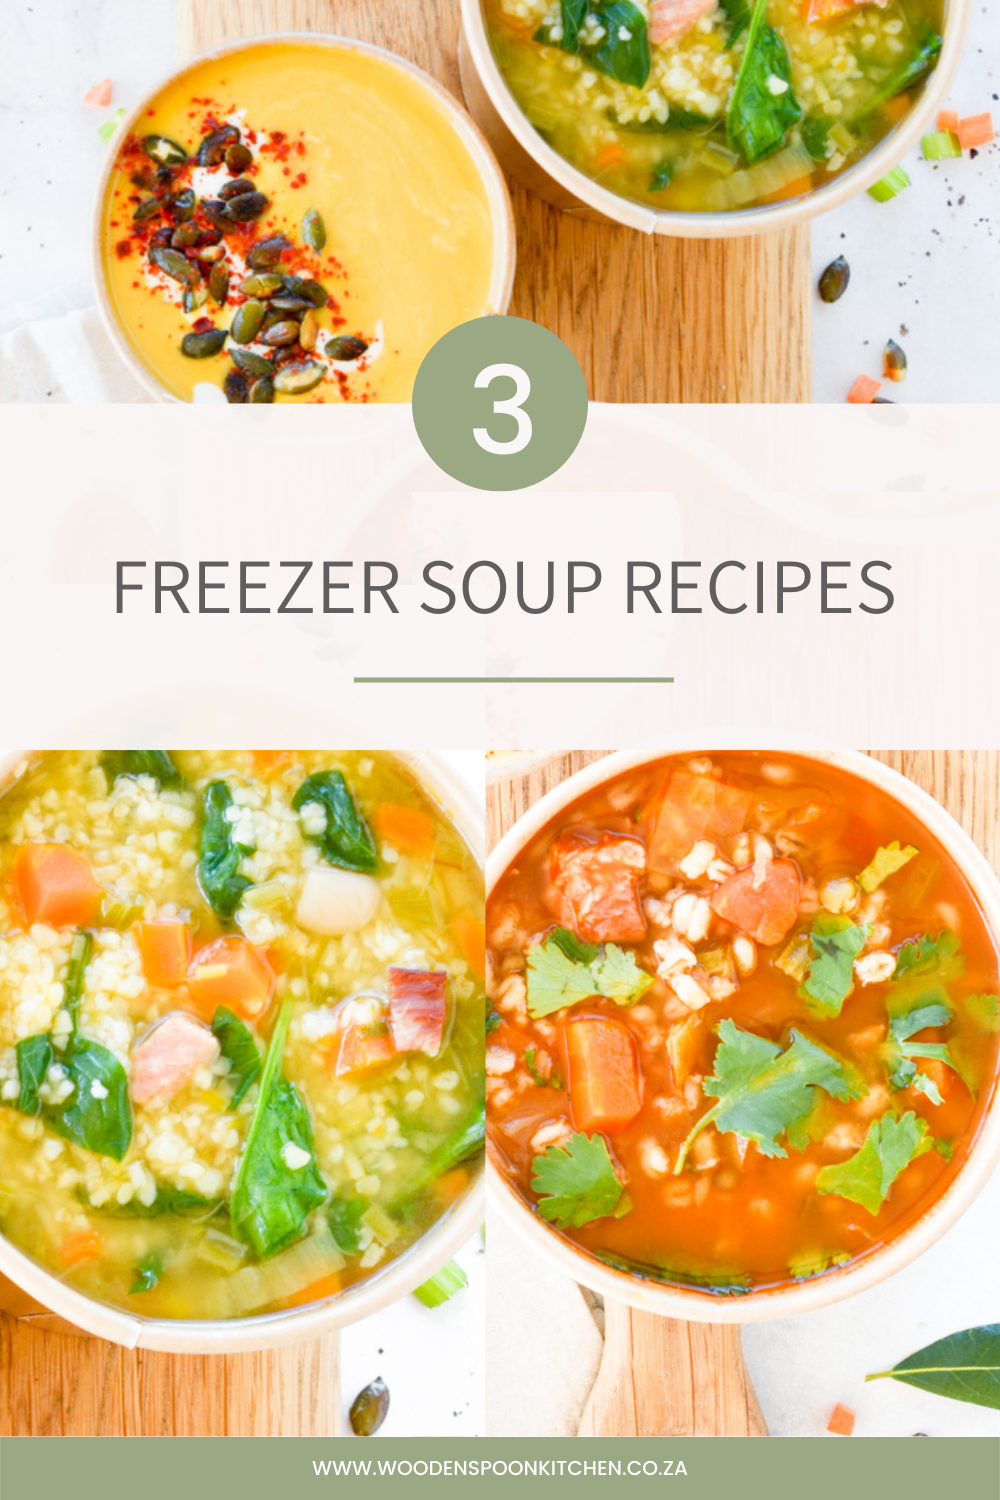 Emgergency soup for your freezer